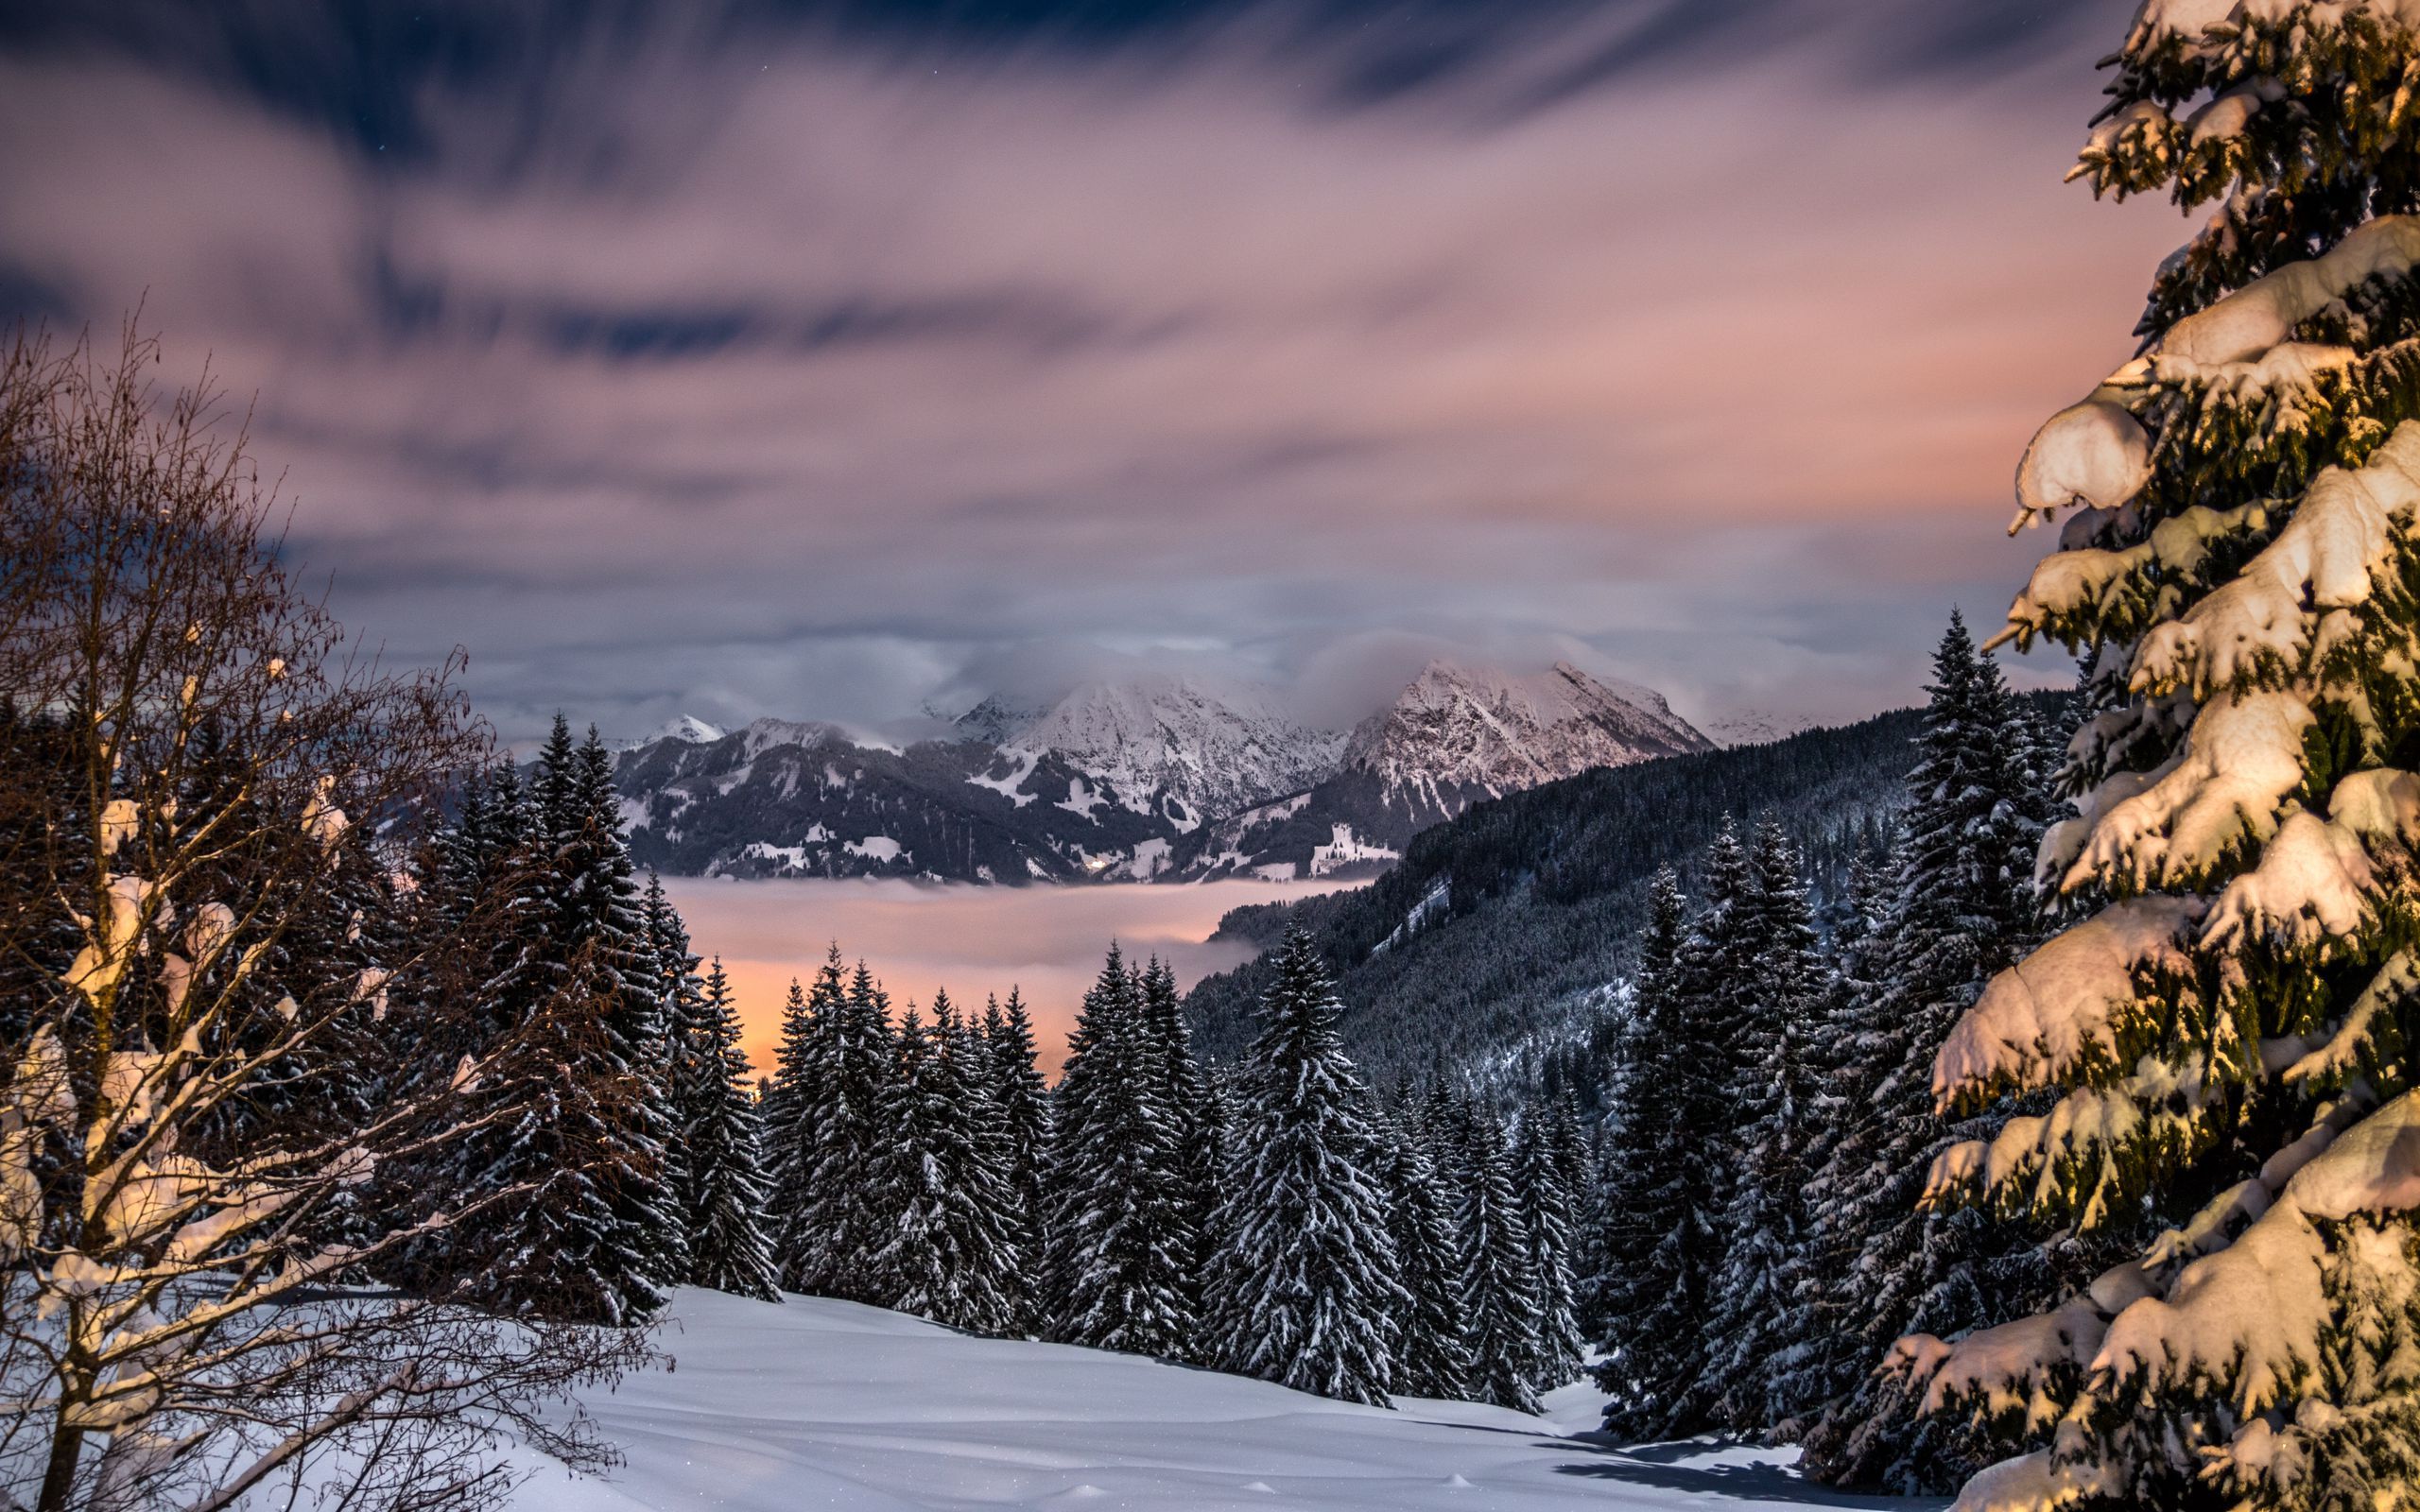 Download wallpaper 2560x1600 winter, mountains, snow, trees, bavaria, germany widescreen 16:10 HD background